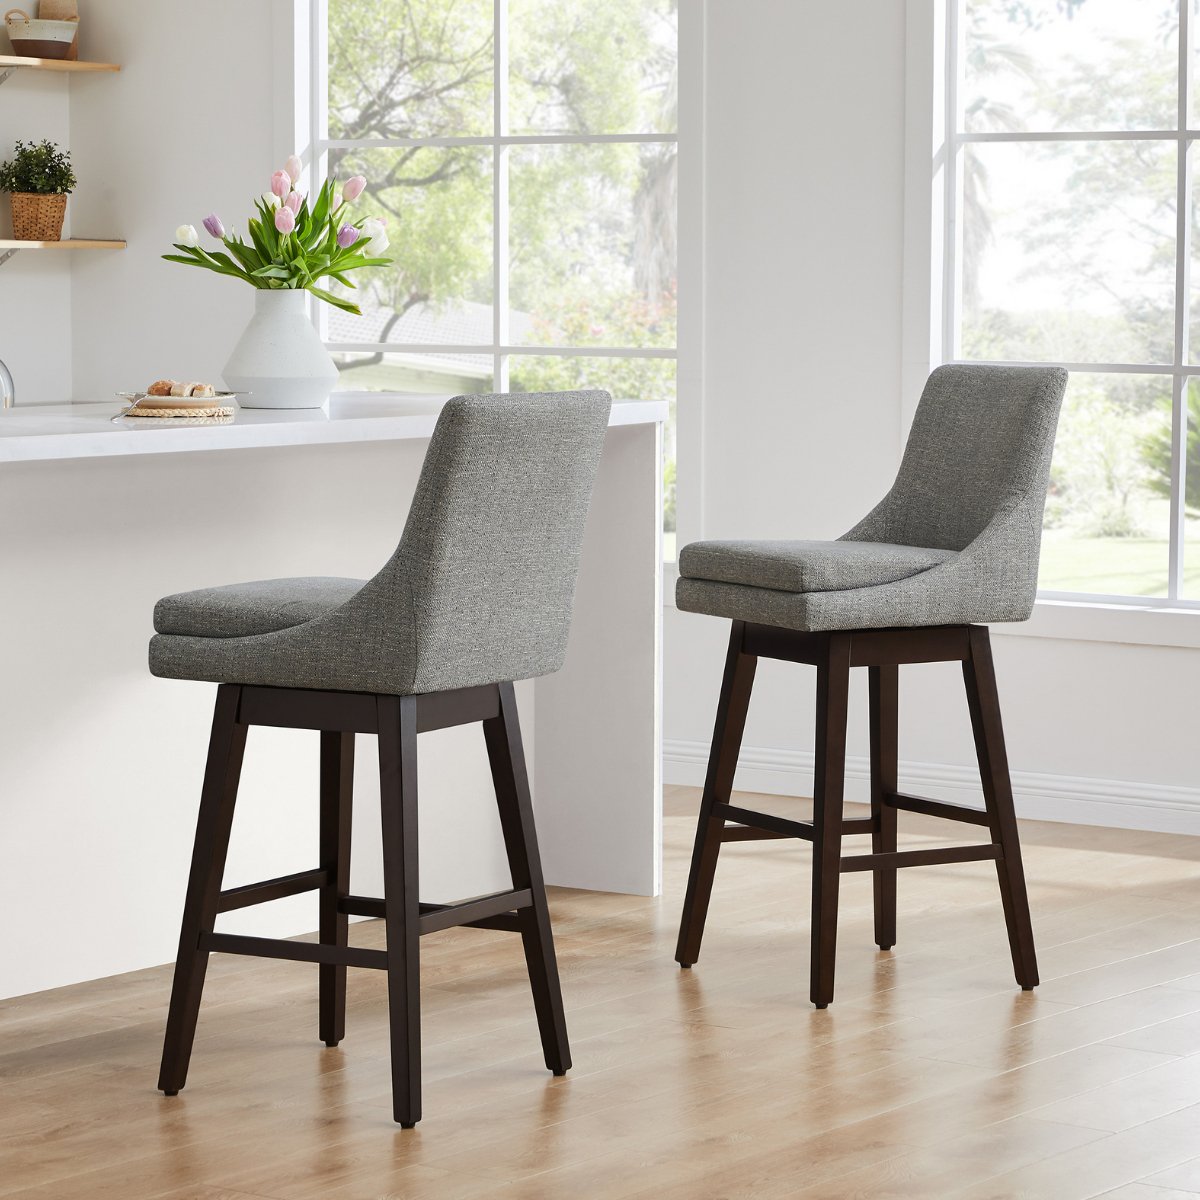 CHITA LIVING-Lissa Swivel Counter Stool 26.8'' ( Set of 2)-Counter Stools-Faux Leather-Blue-